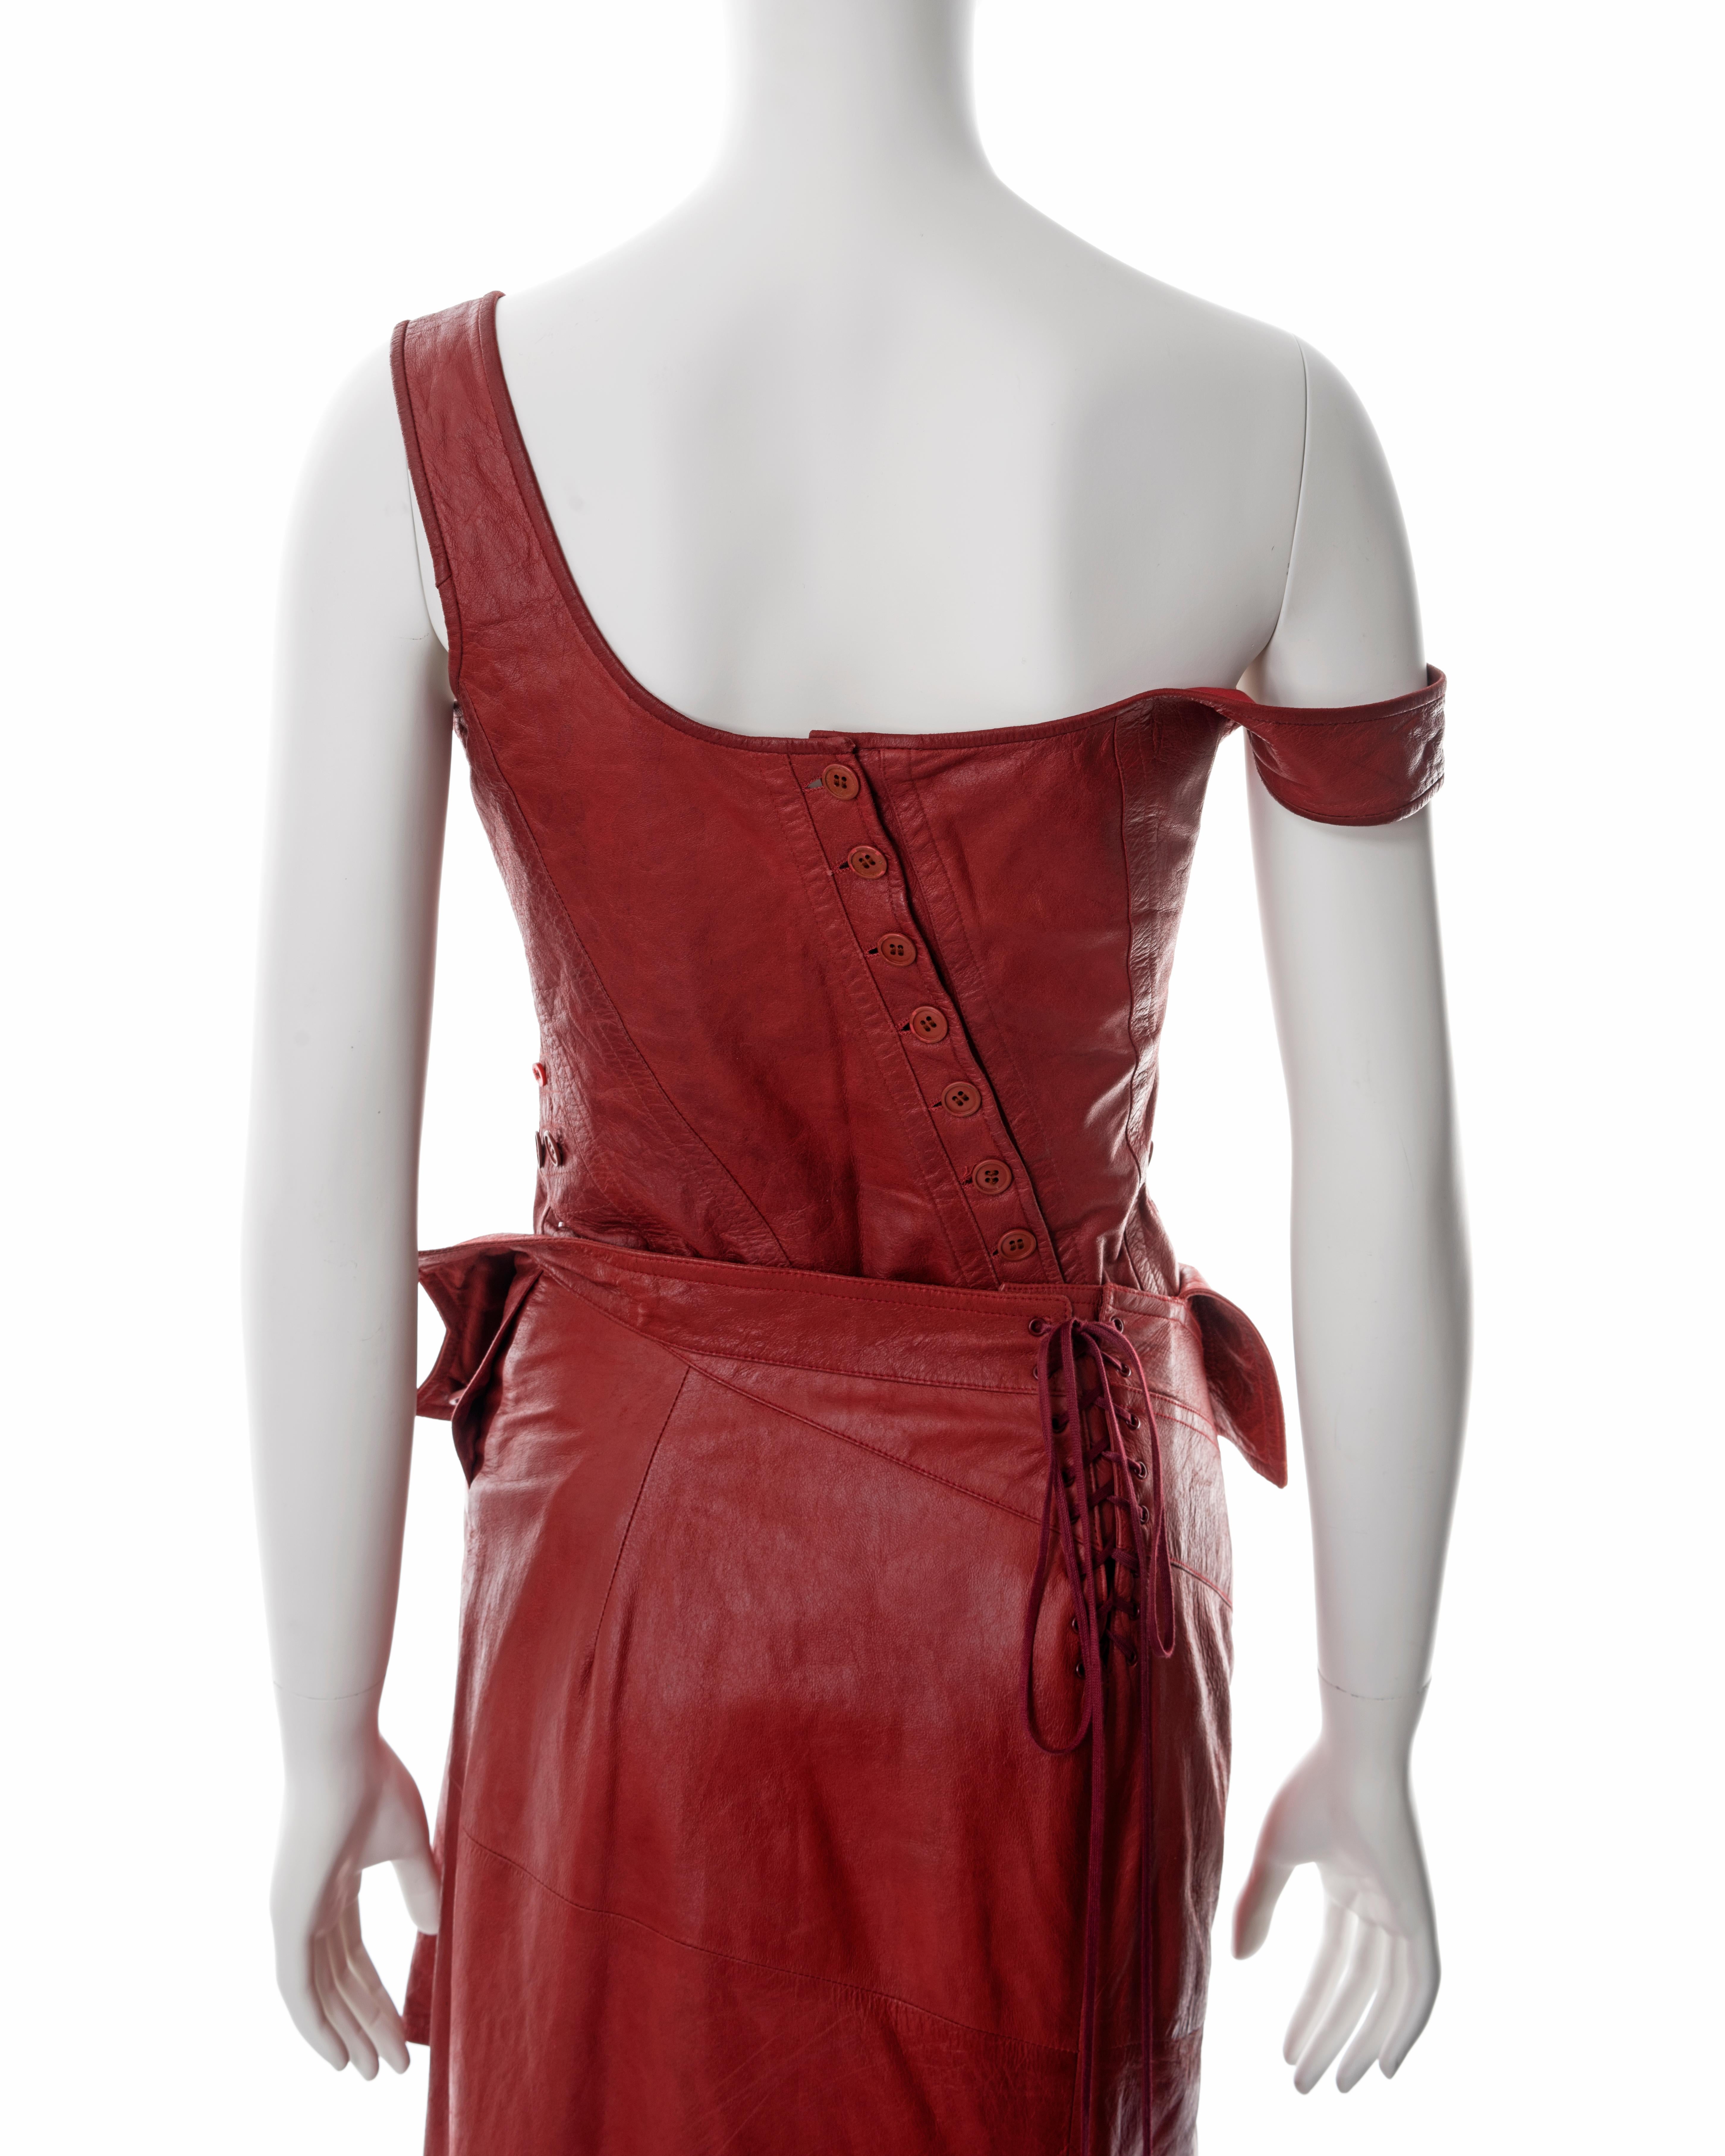 Christian Dior by John Galliano red lambskin leather corset and skirt, ss 2000 7